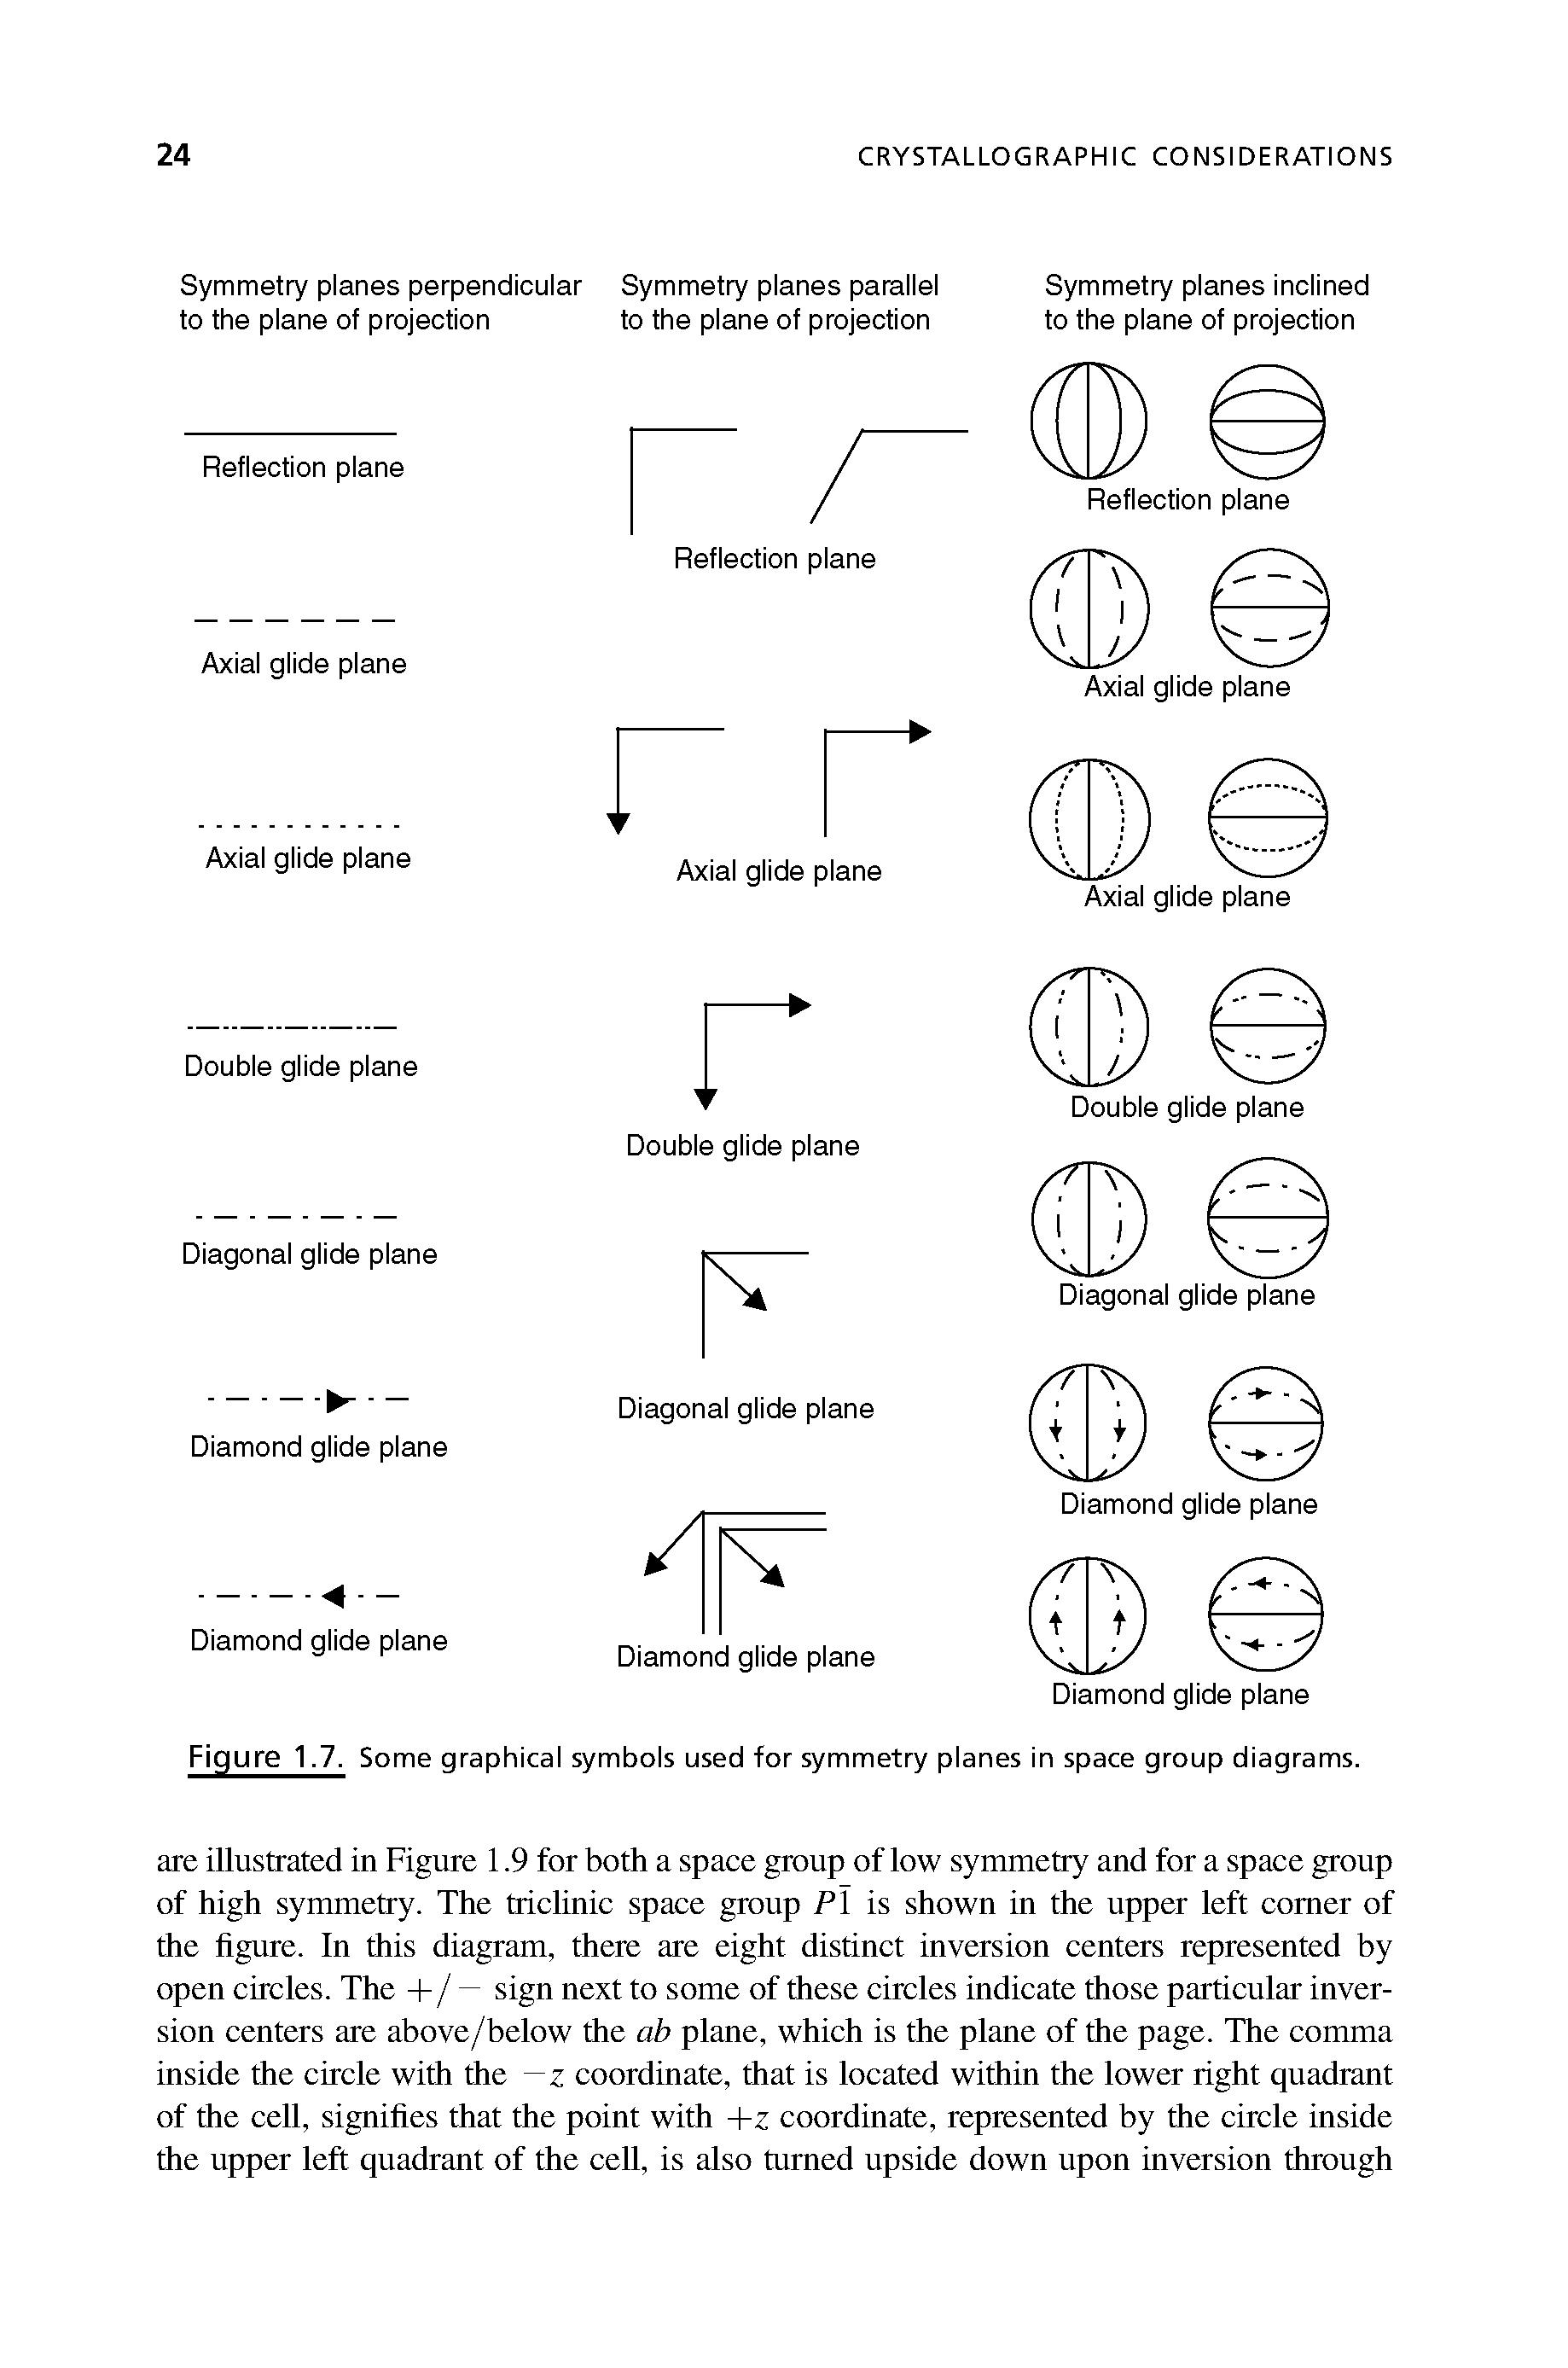 Figure 1.7. Some graphical symbols used for symmetry planes in space group diagrams.